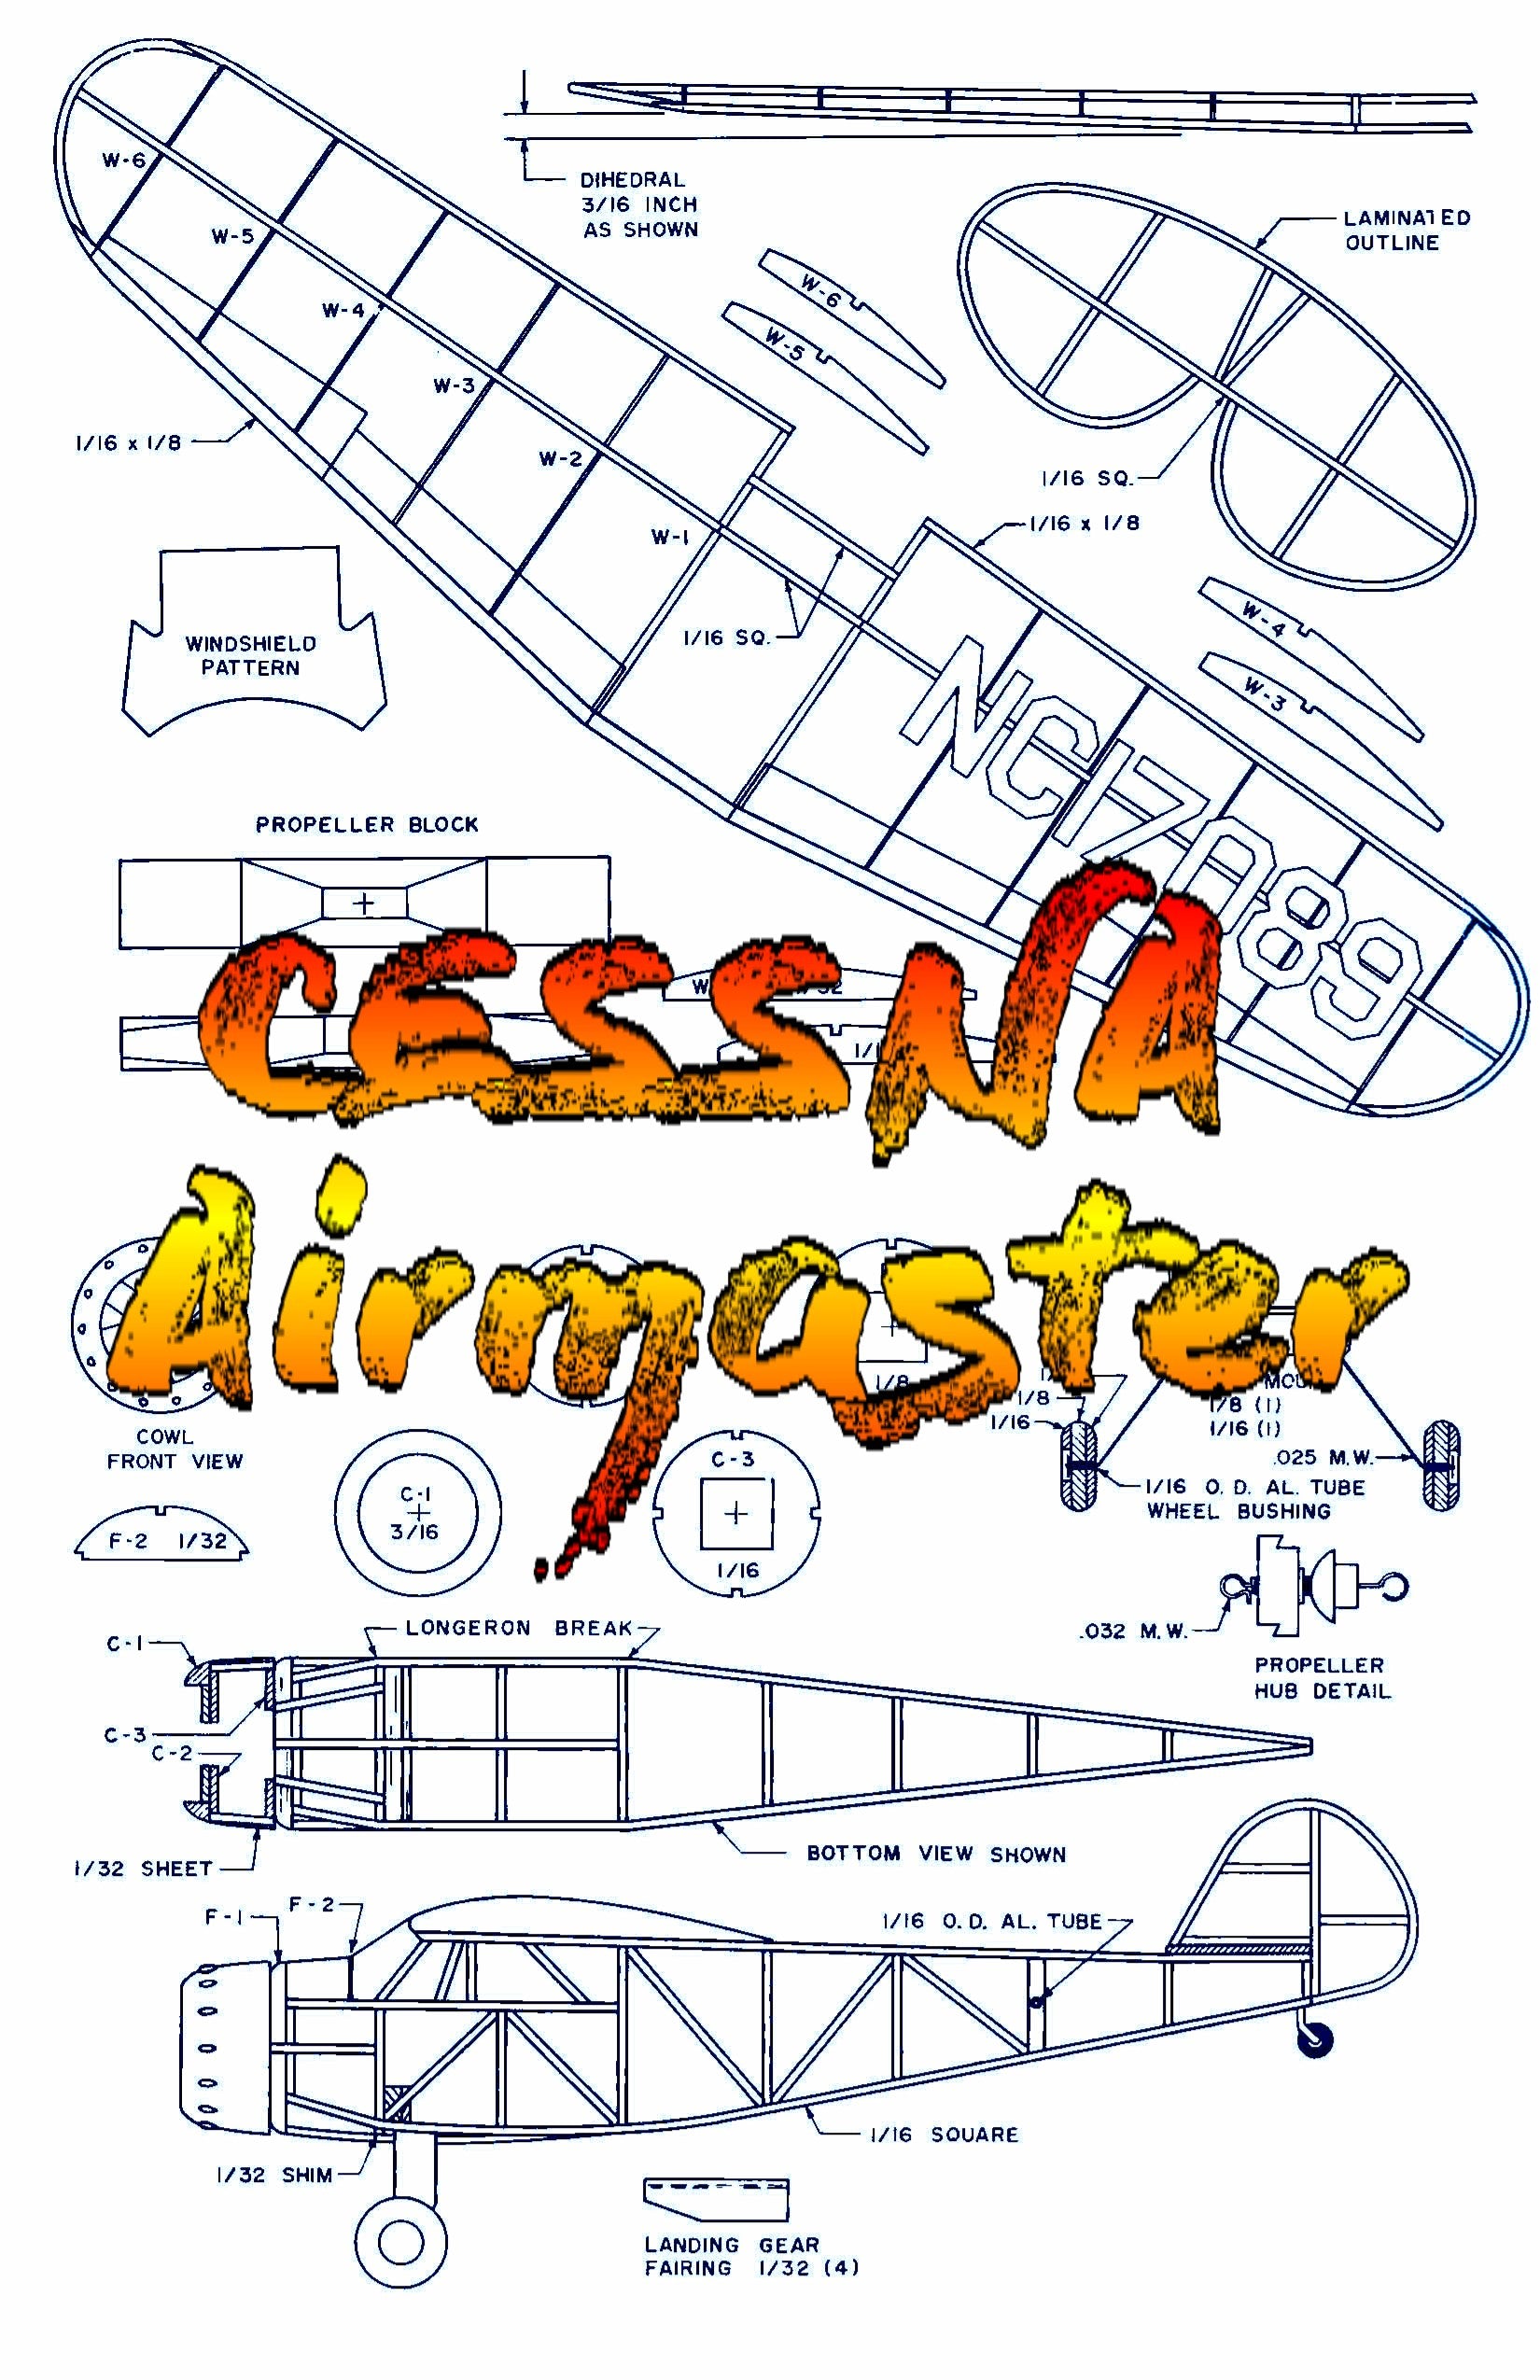 full size printed peanut scale plans cessna "airmaster" model is scaled directly from mr. matt's excellent drawings